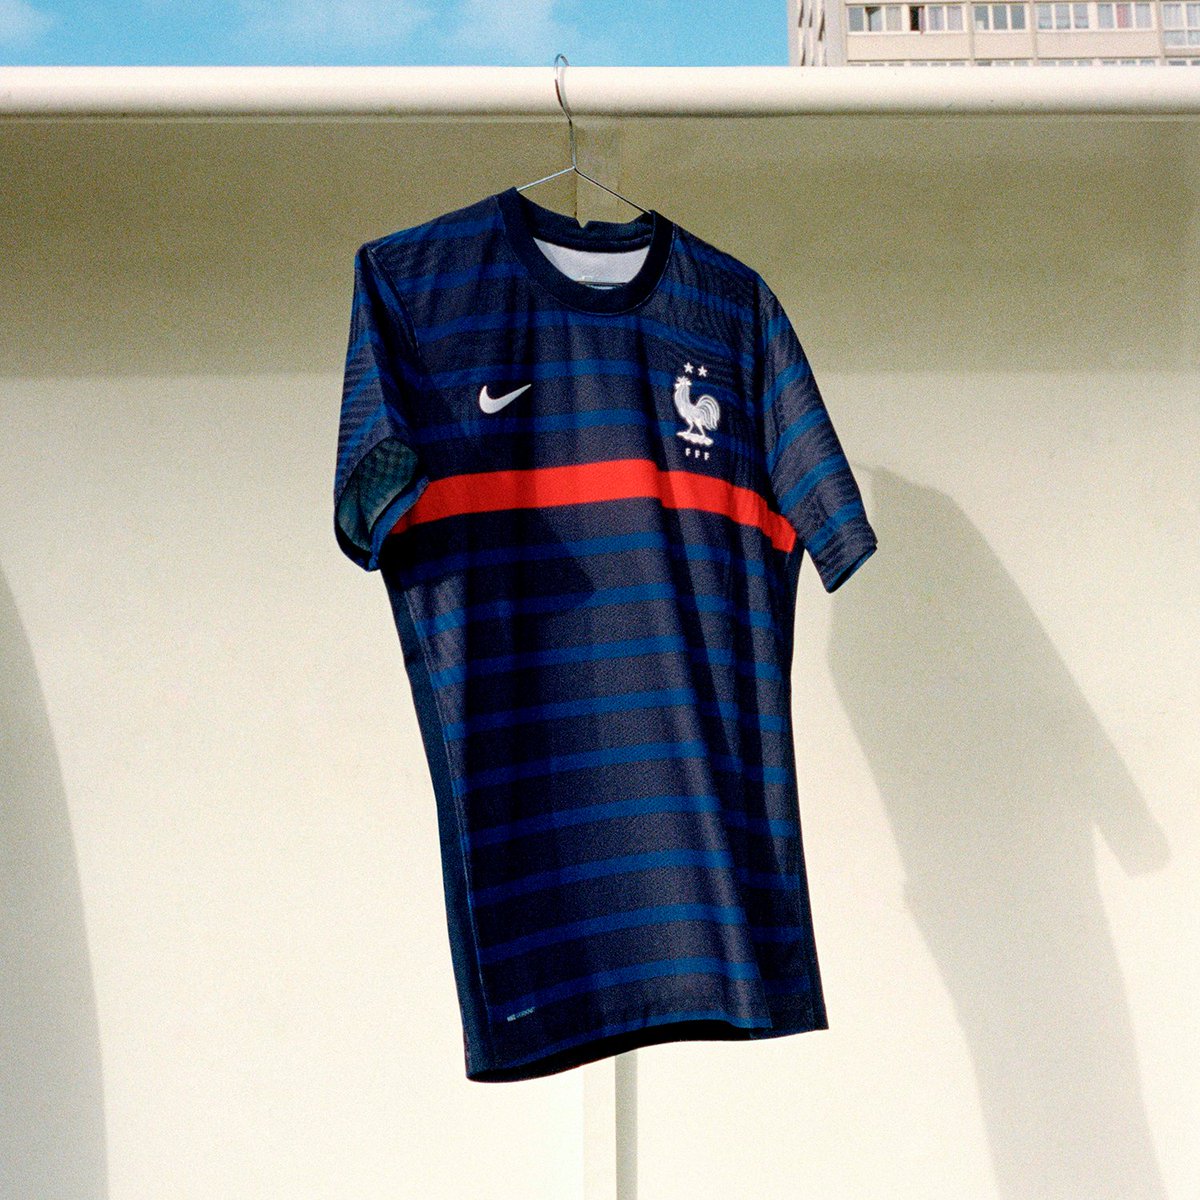 Shirt Alert: France's new Nike home kit is outWhat do you think?